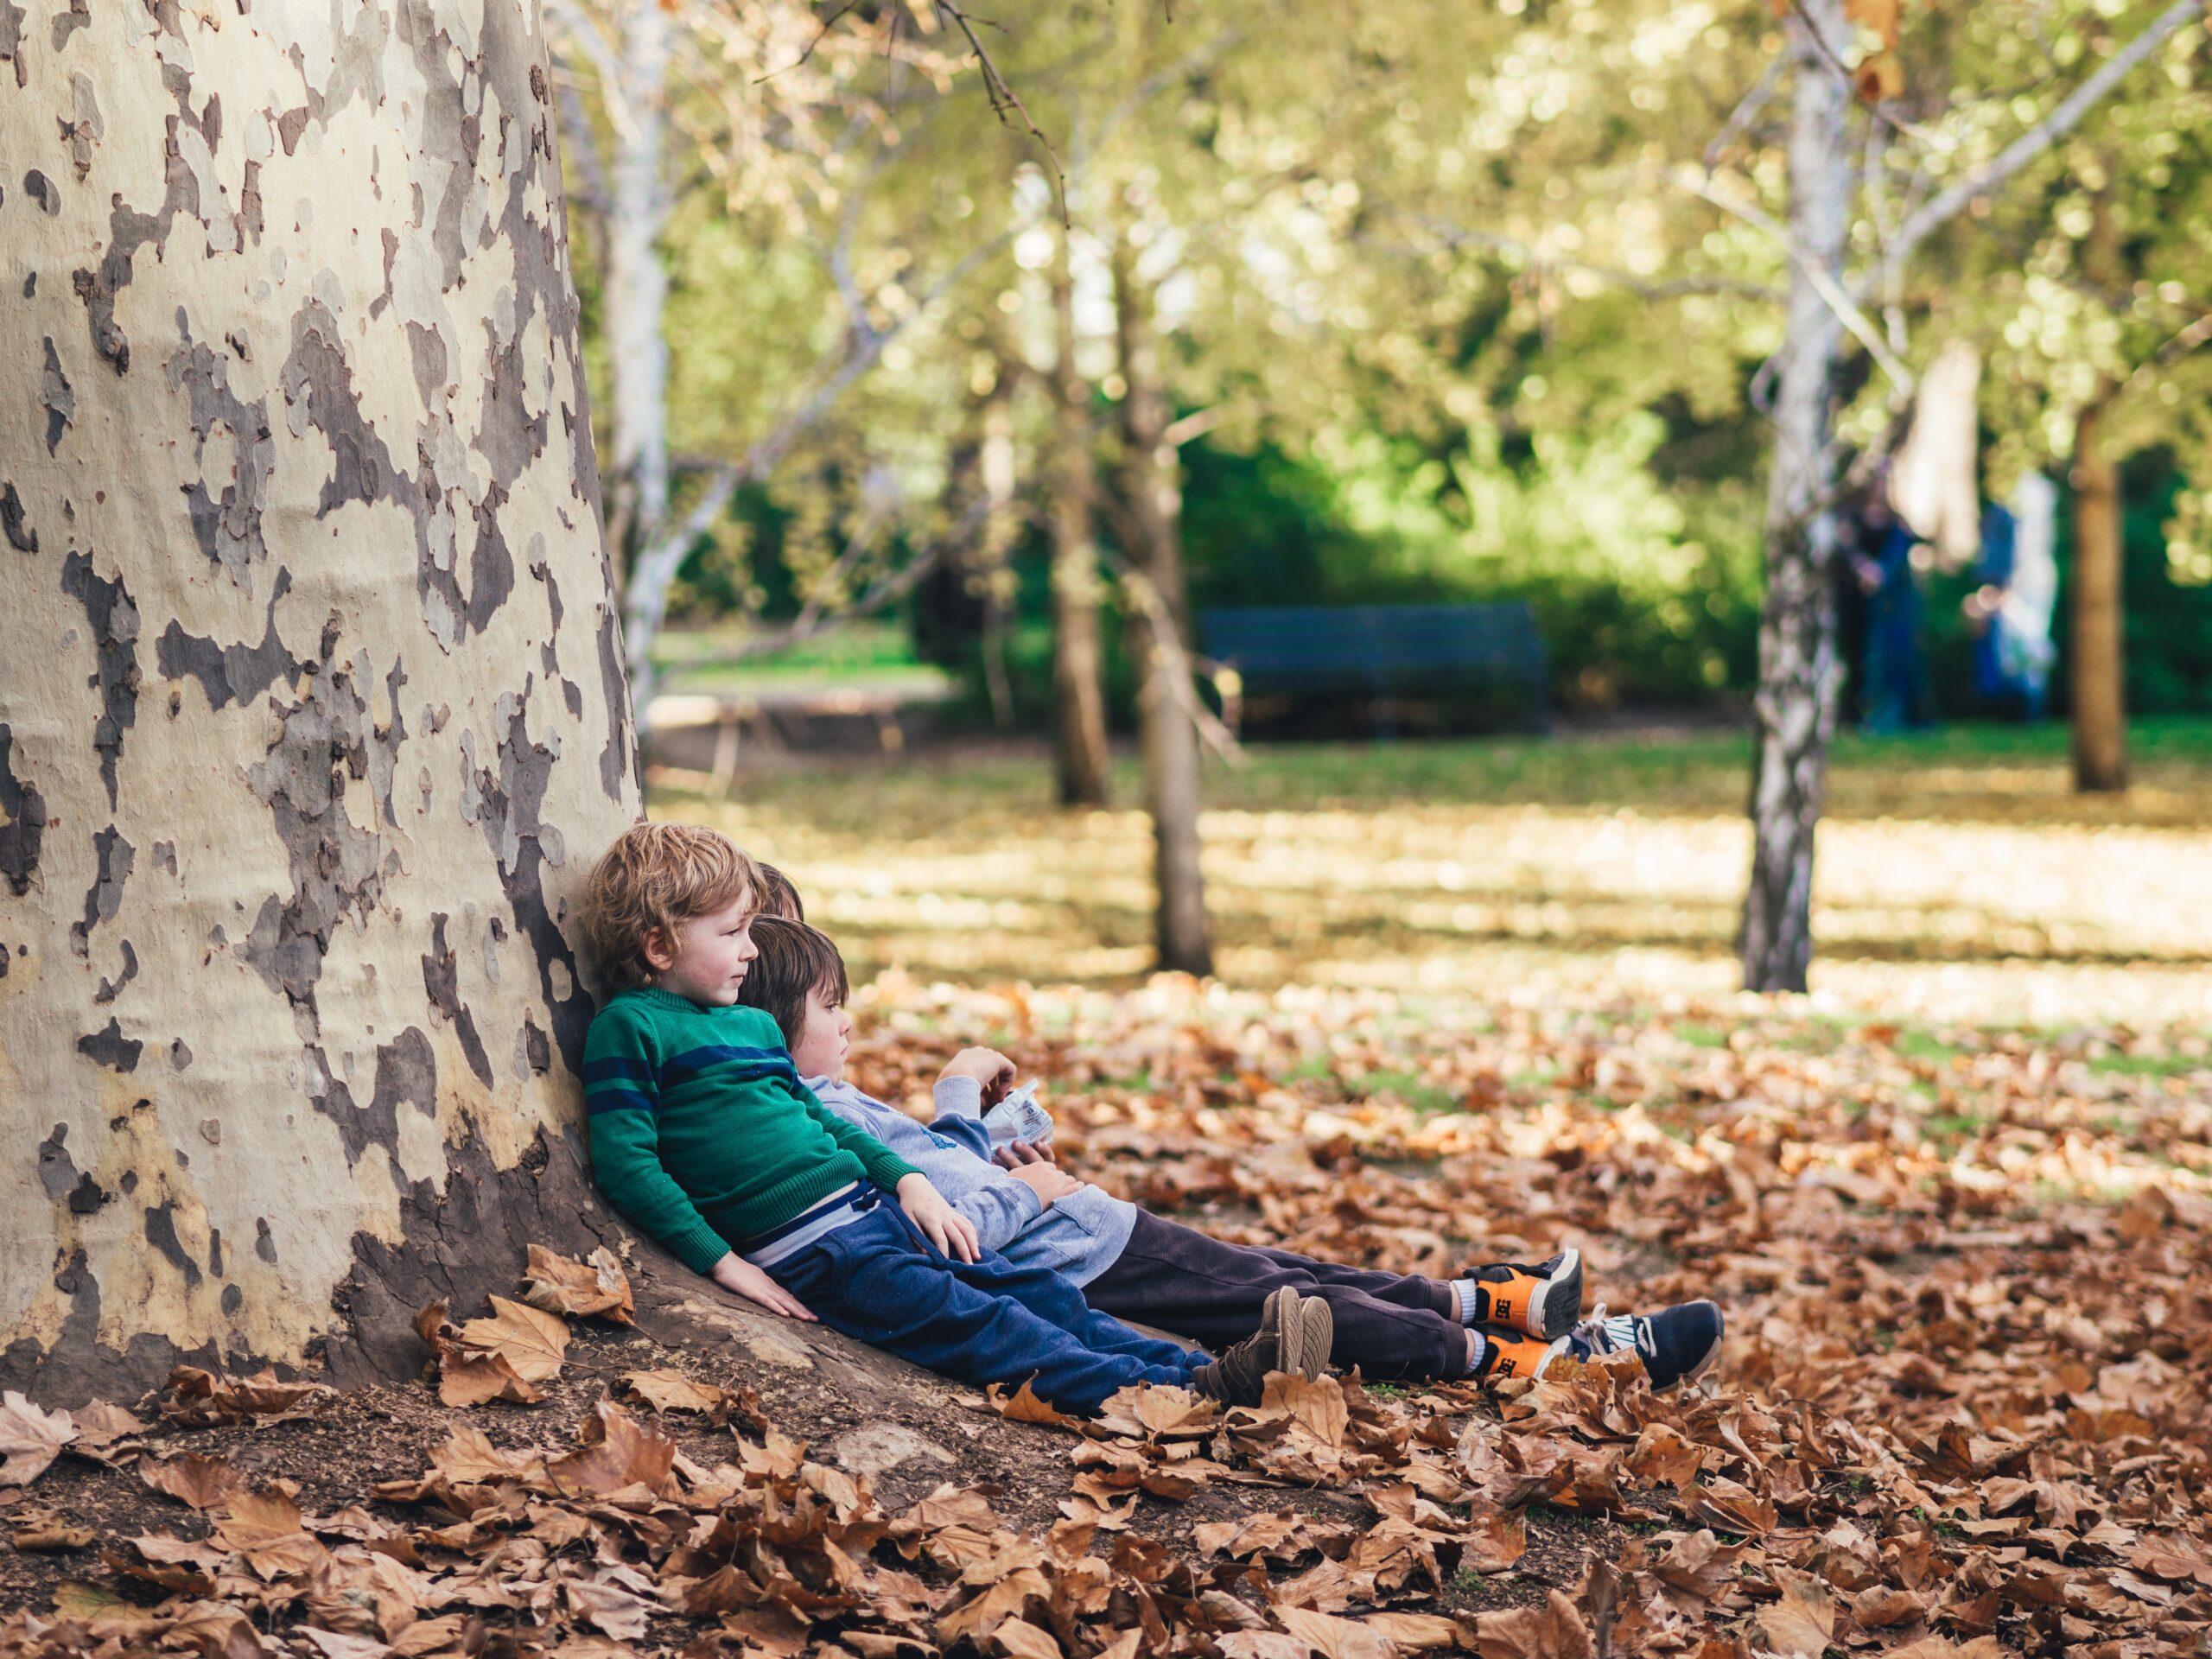 kids sitting against a big tree outdoors in fall as illustrating getting out in nature for a mental health reset day